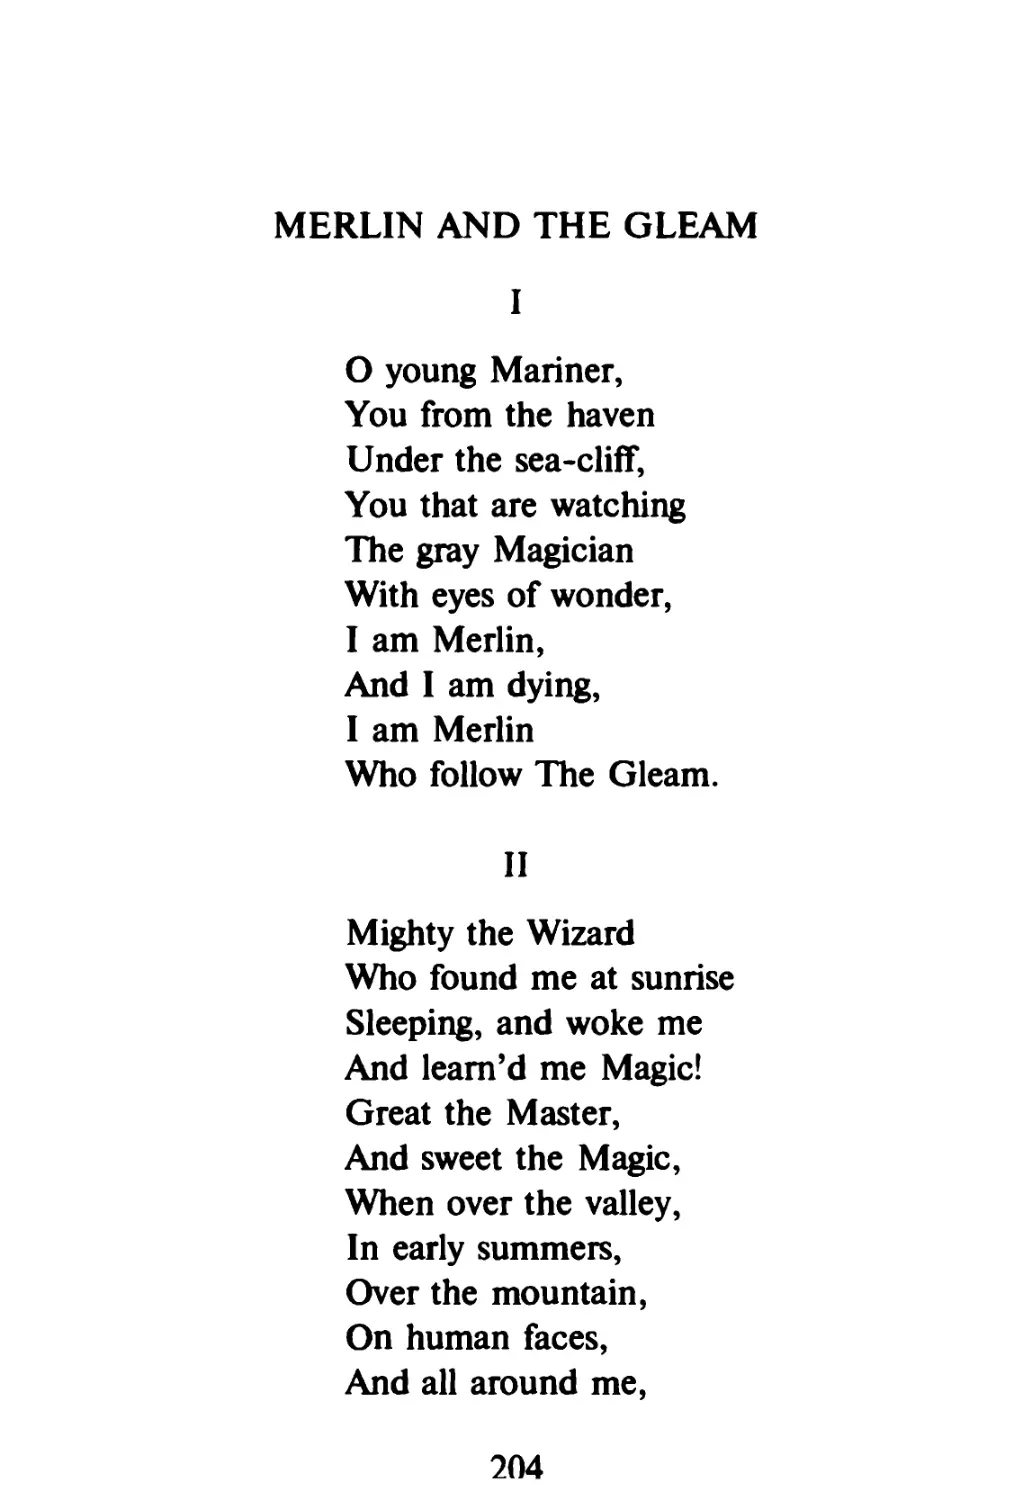 Merlin and the Gleam